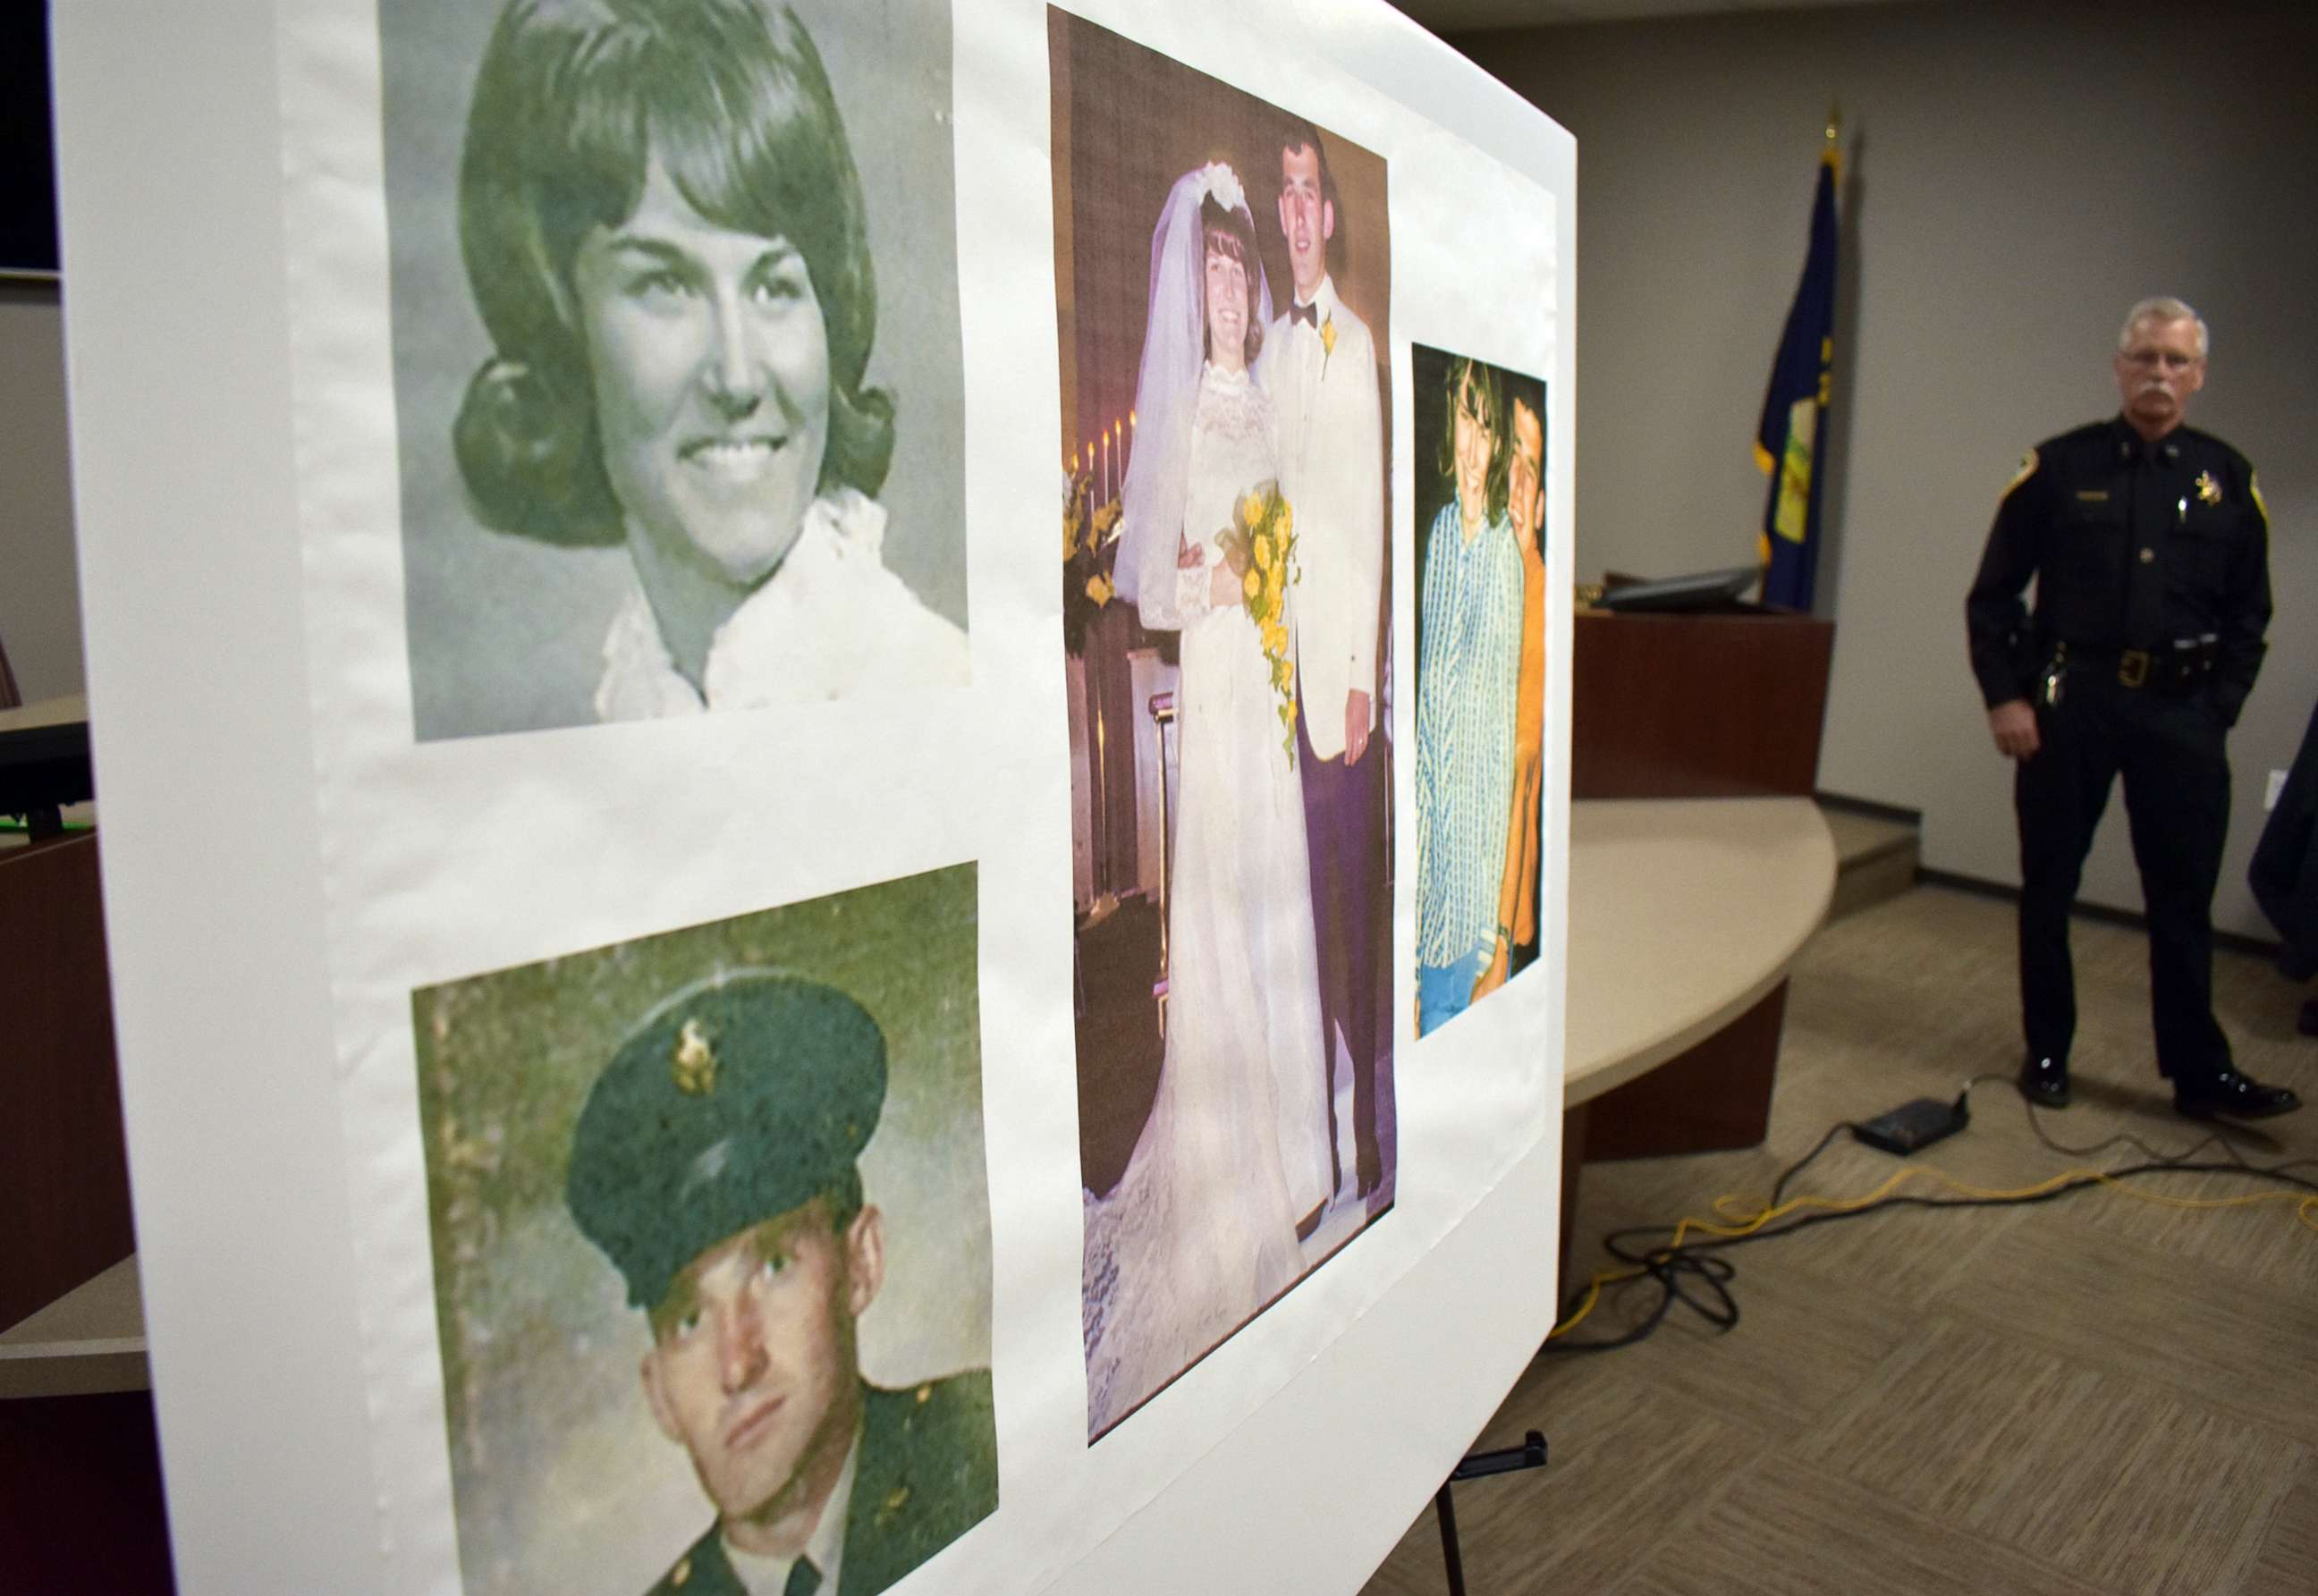 PHOTO: Photos of Linda and Clifford Bernhardt, who were killed in 1973, are displayed at a press conference at the Yellowstone County administrative offices in Billings, Montana on Monday, March 25, 2019.